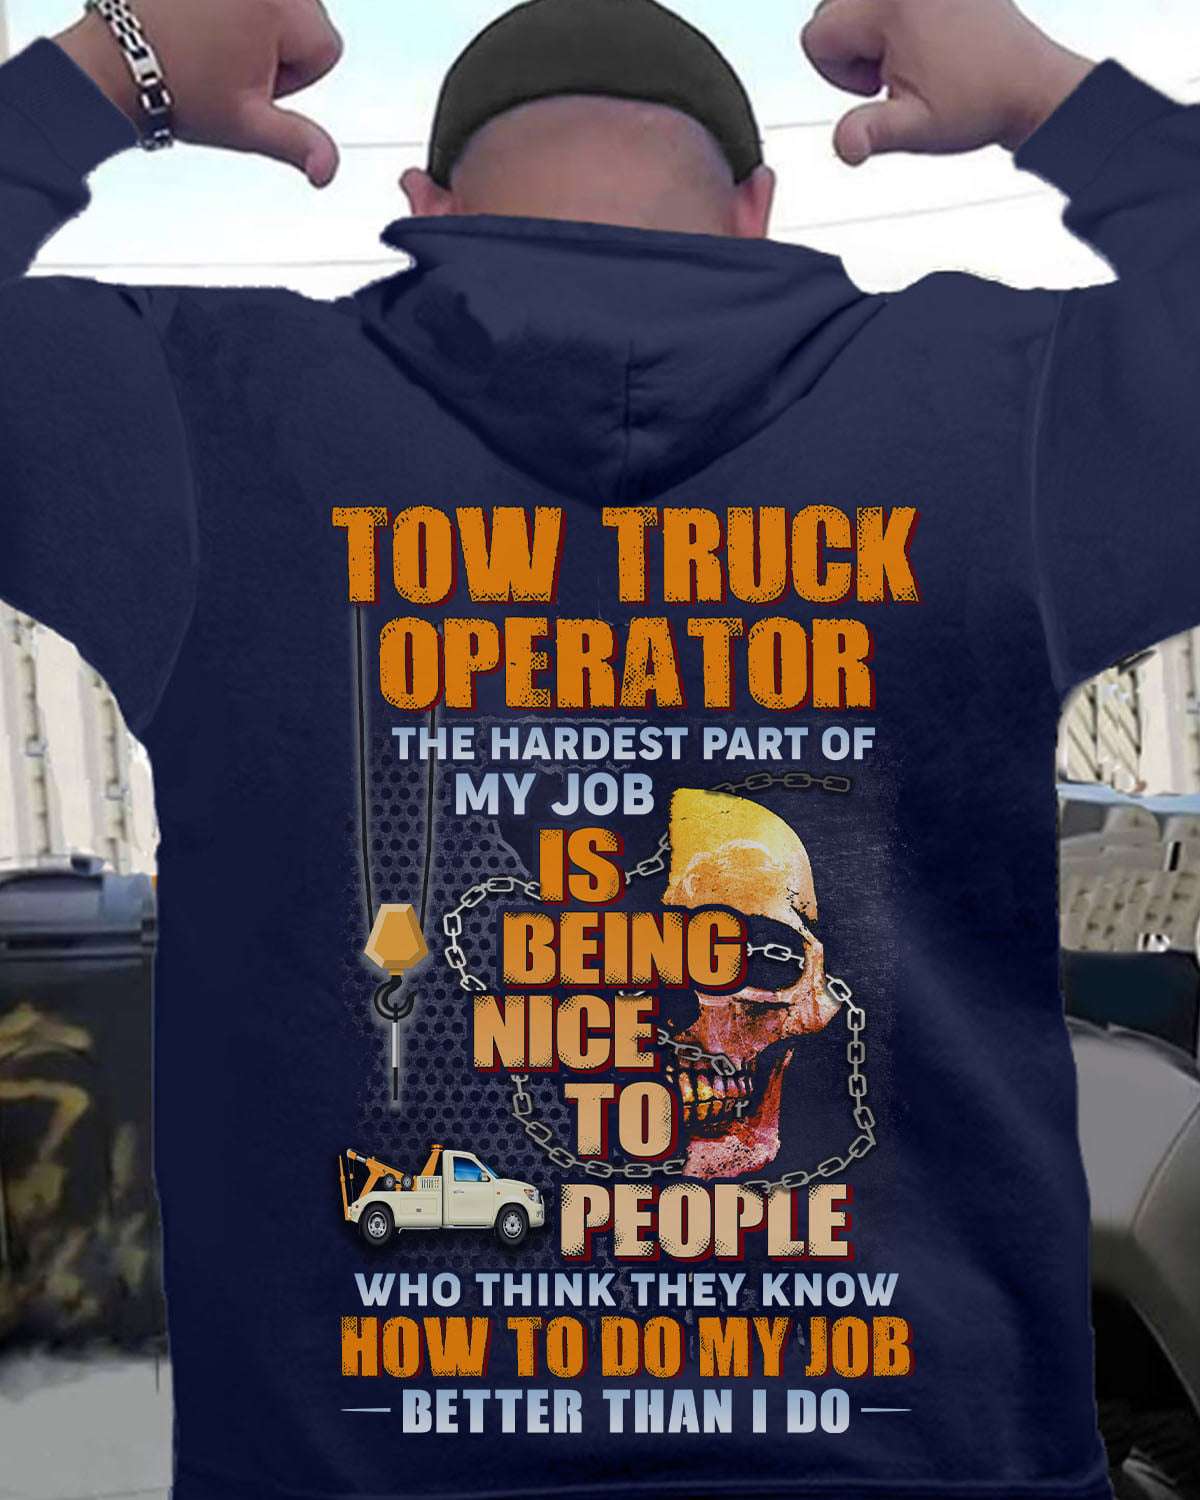 Tow truck operator - The hardest part of my job is being nice to people, skull tow truck operator